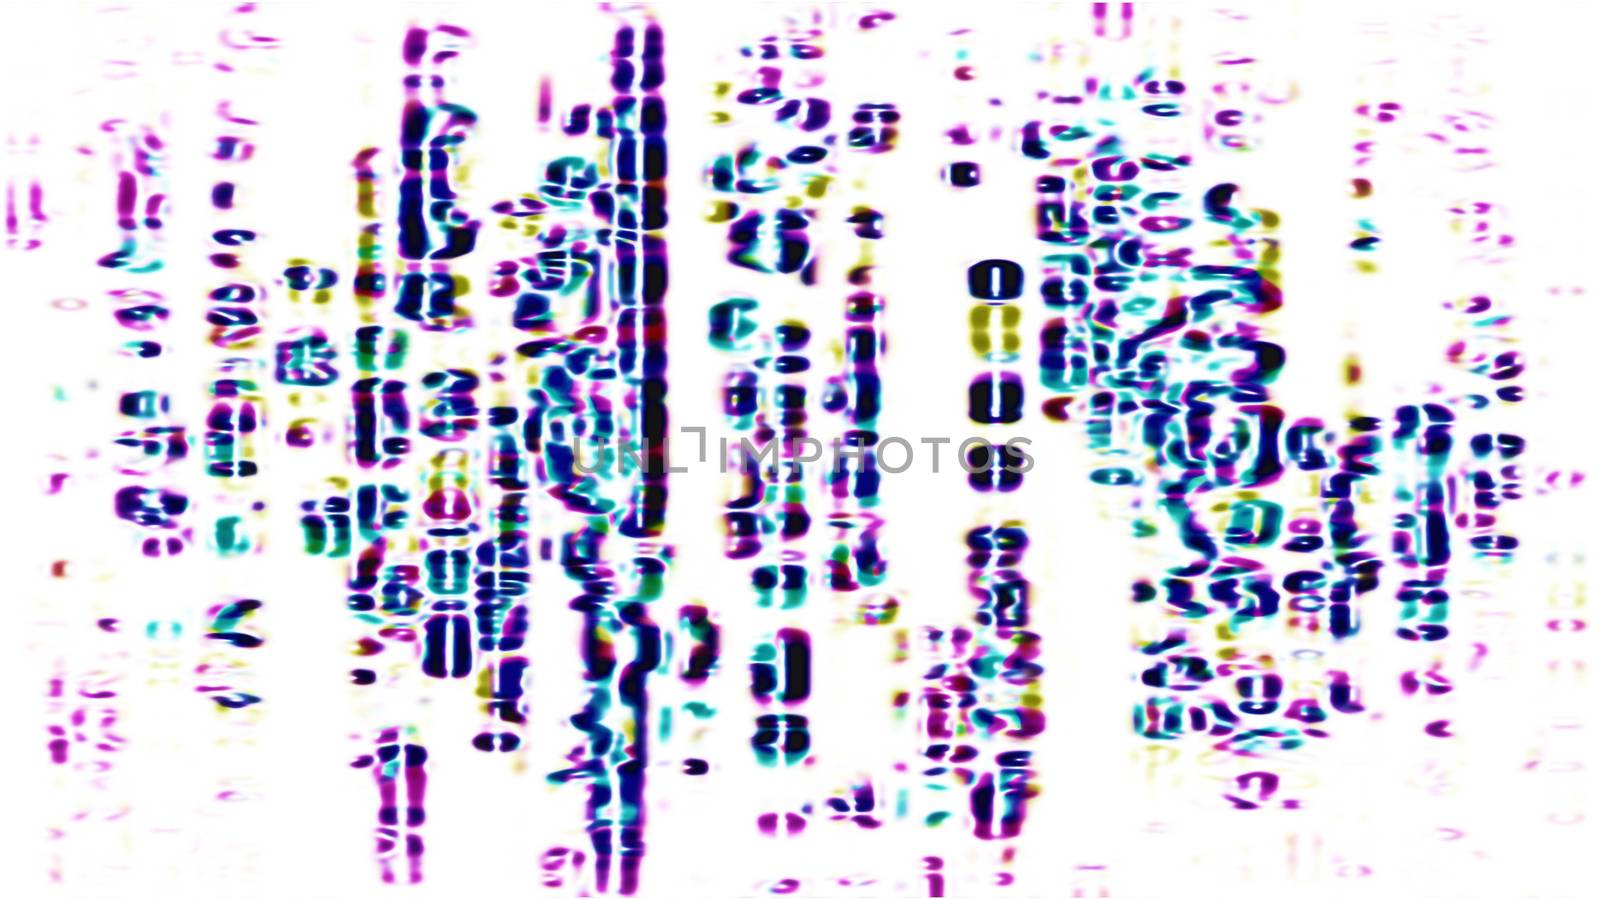 Future Tech 0435 - Futuristic technology screen communication with abstract noise.